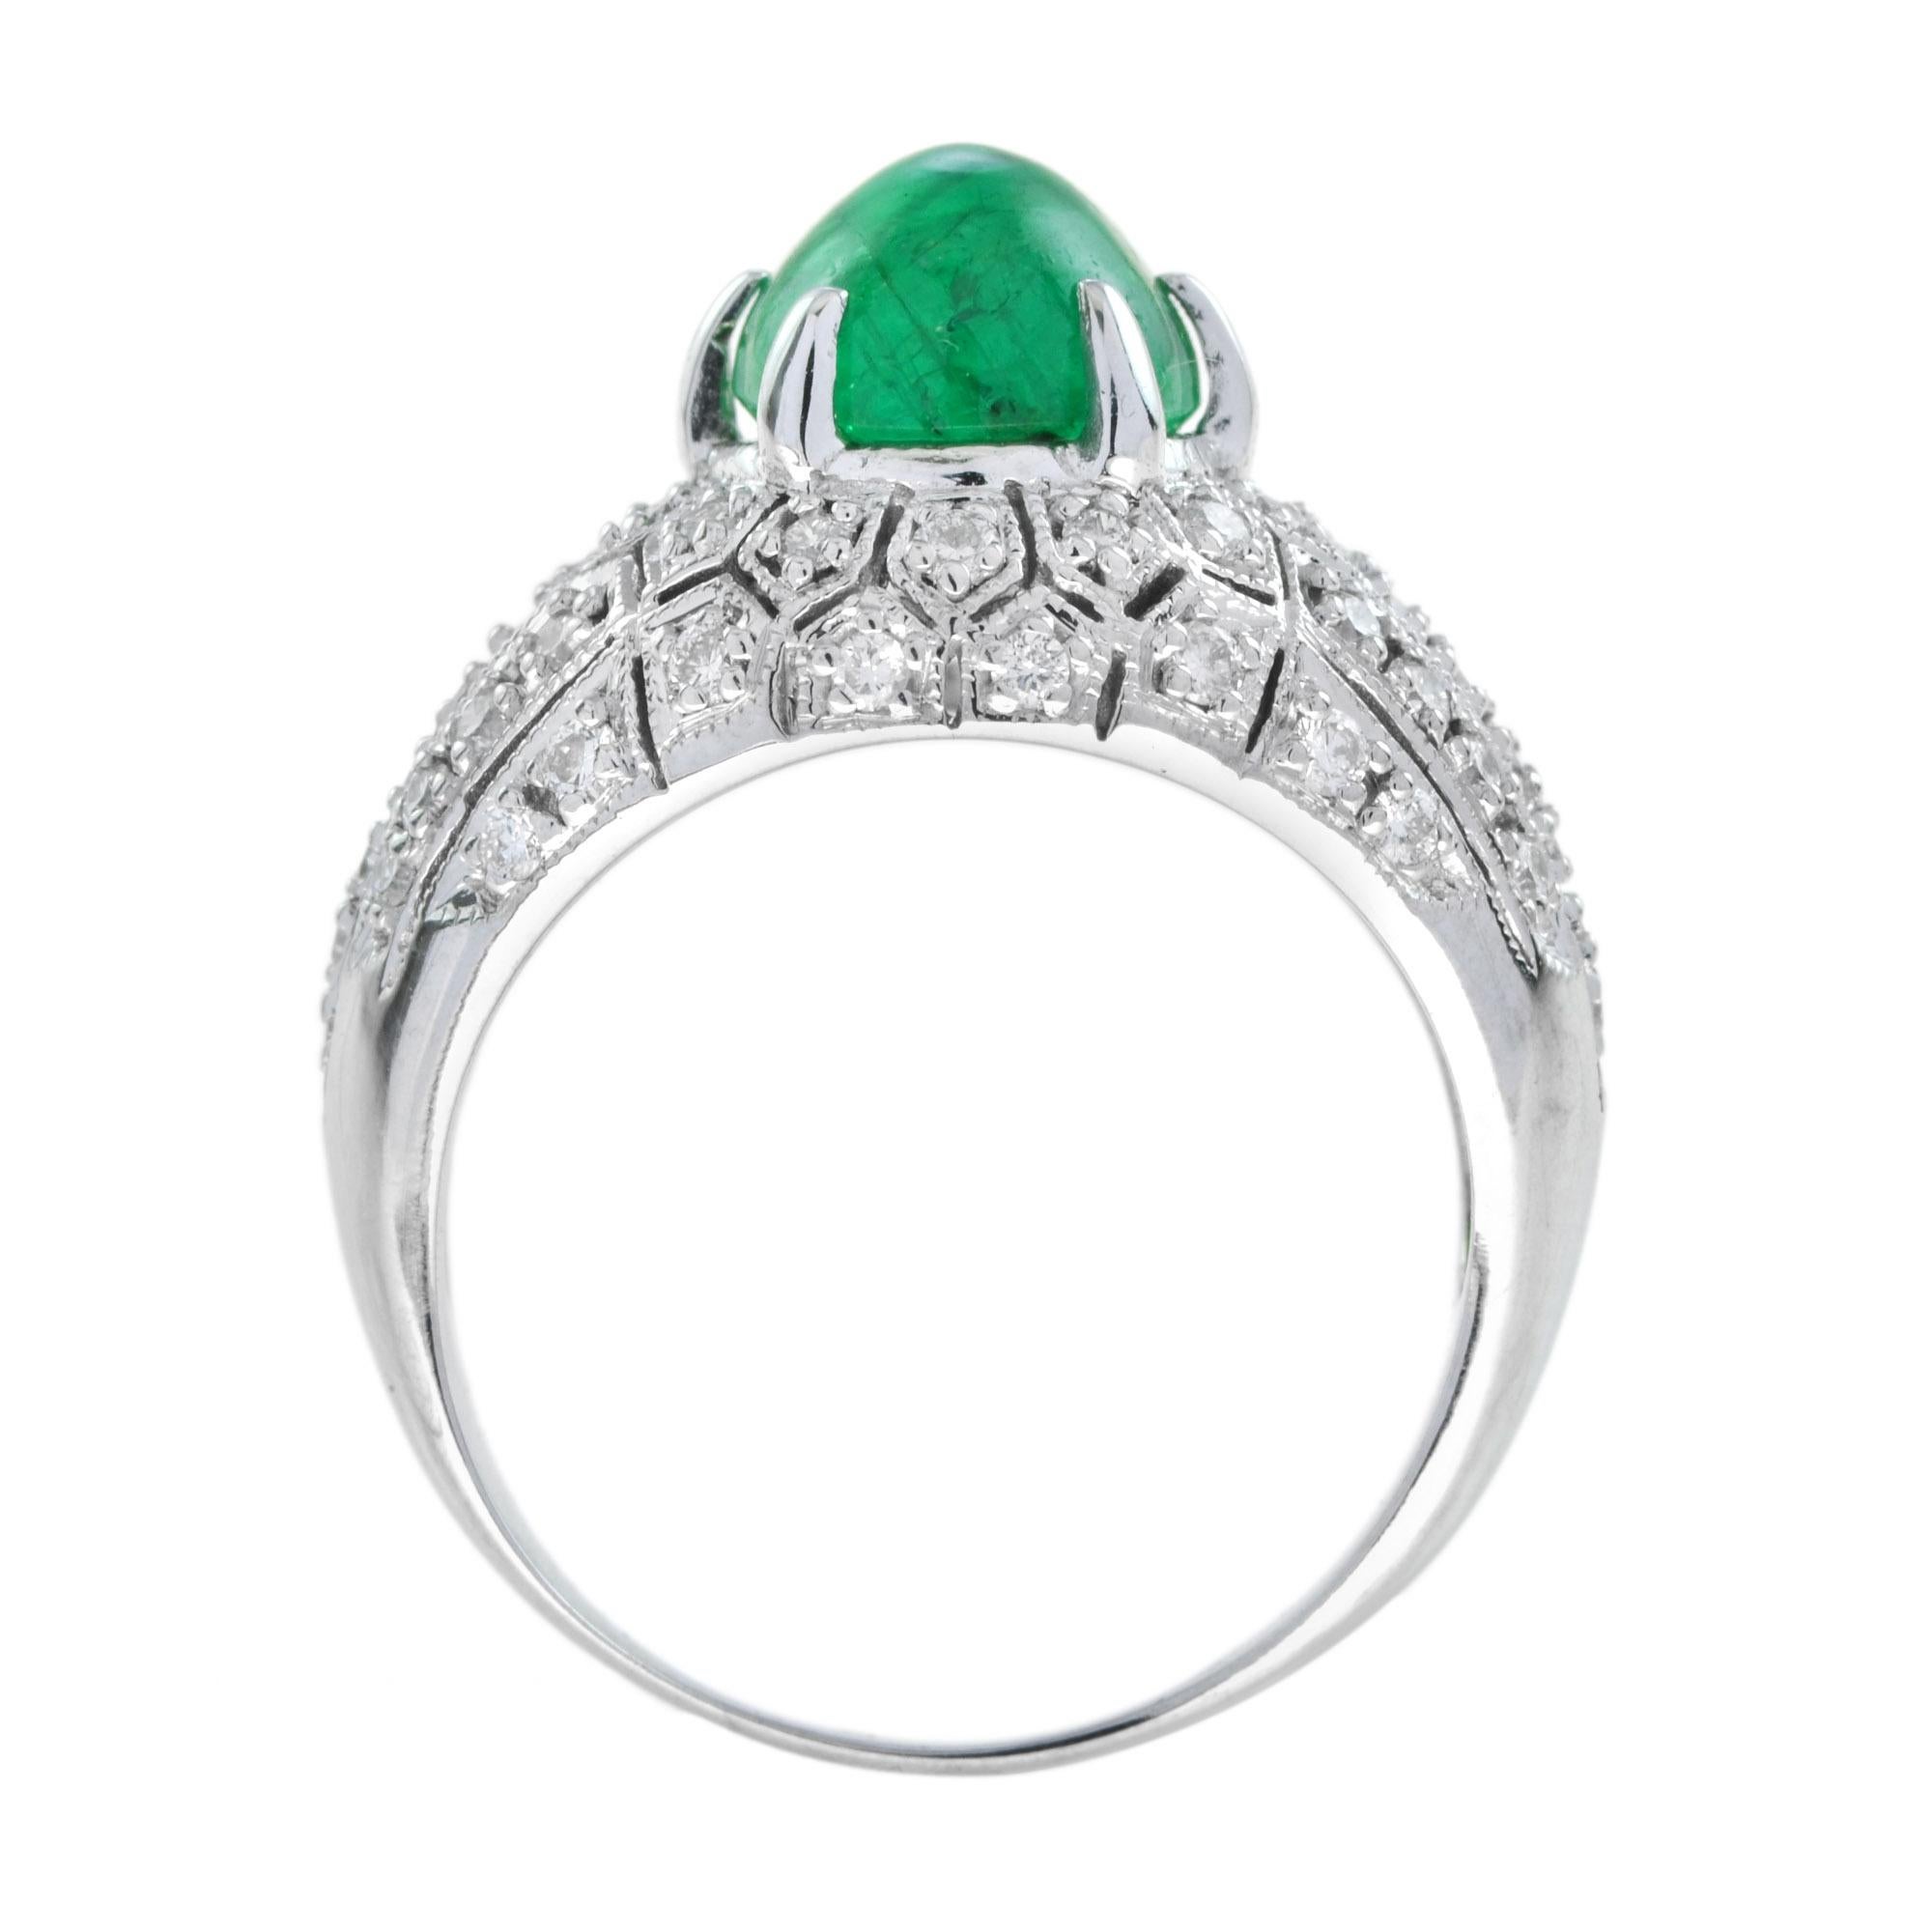 Women's or Men's Cabochon Emerald and Diamond Dome Ring in 14K White Gold